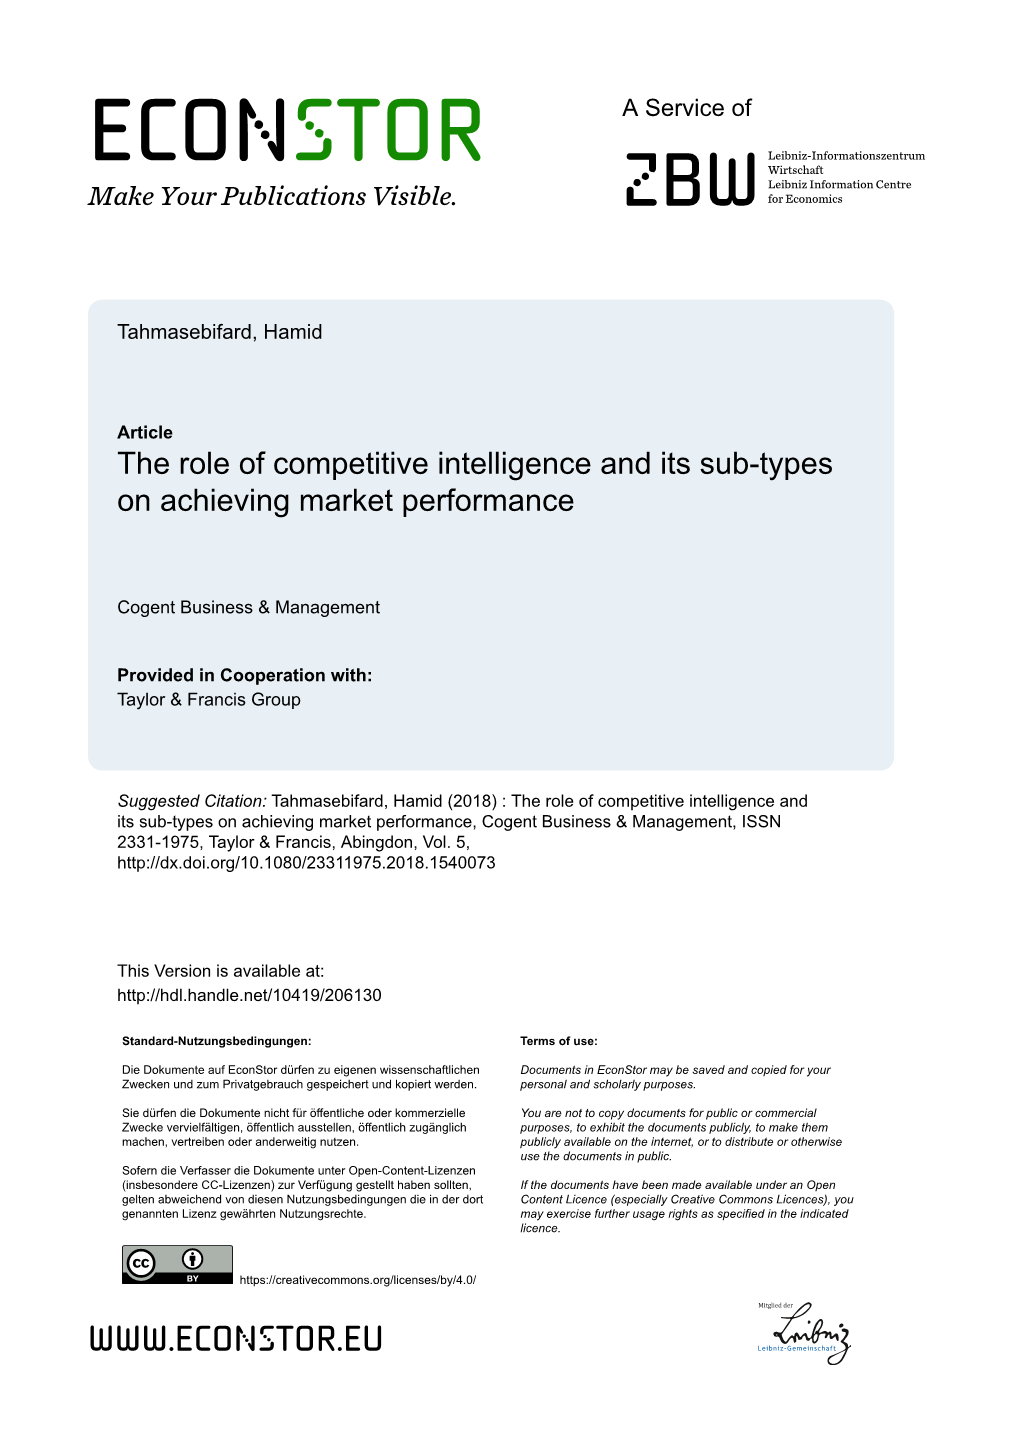 The Role of Competitive Intelligence and Its Sub-Types on Achieving Market Performance